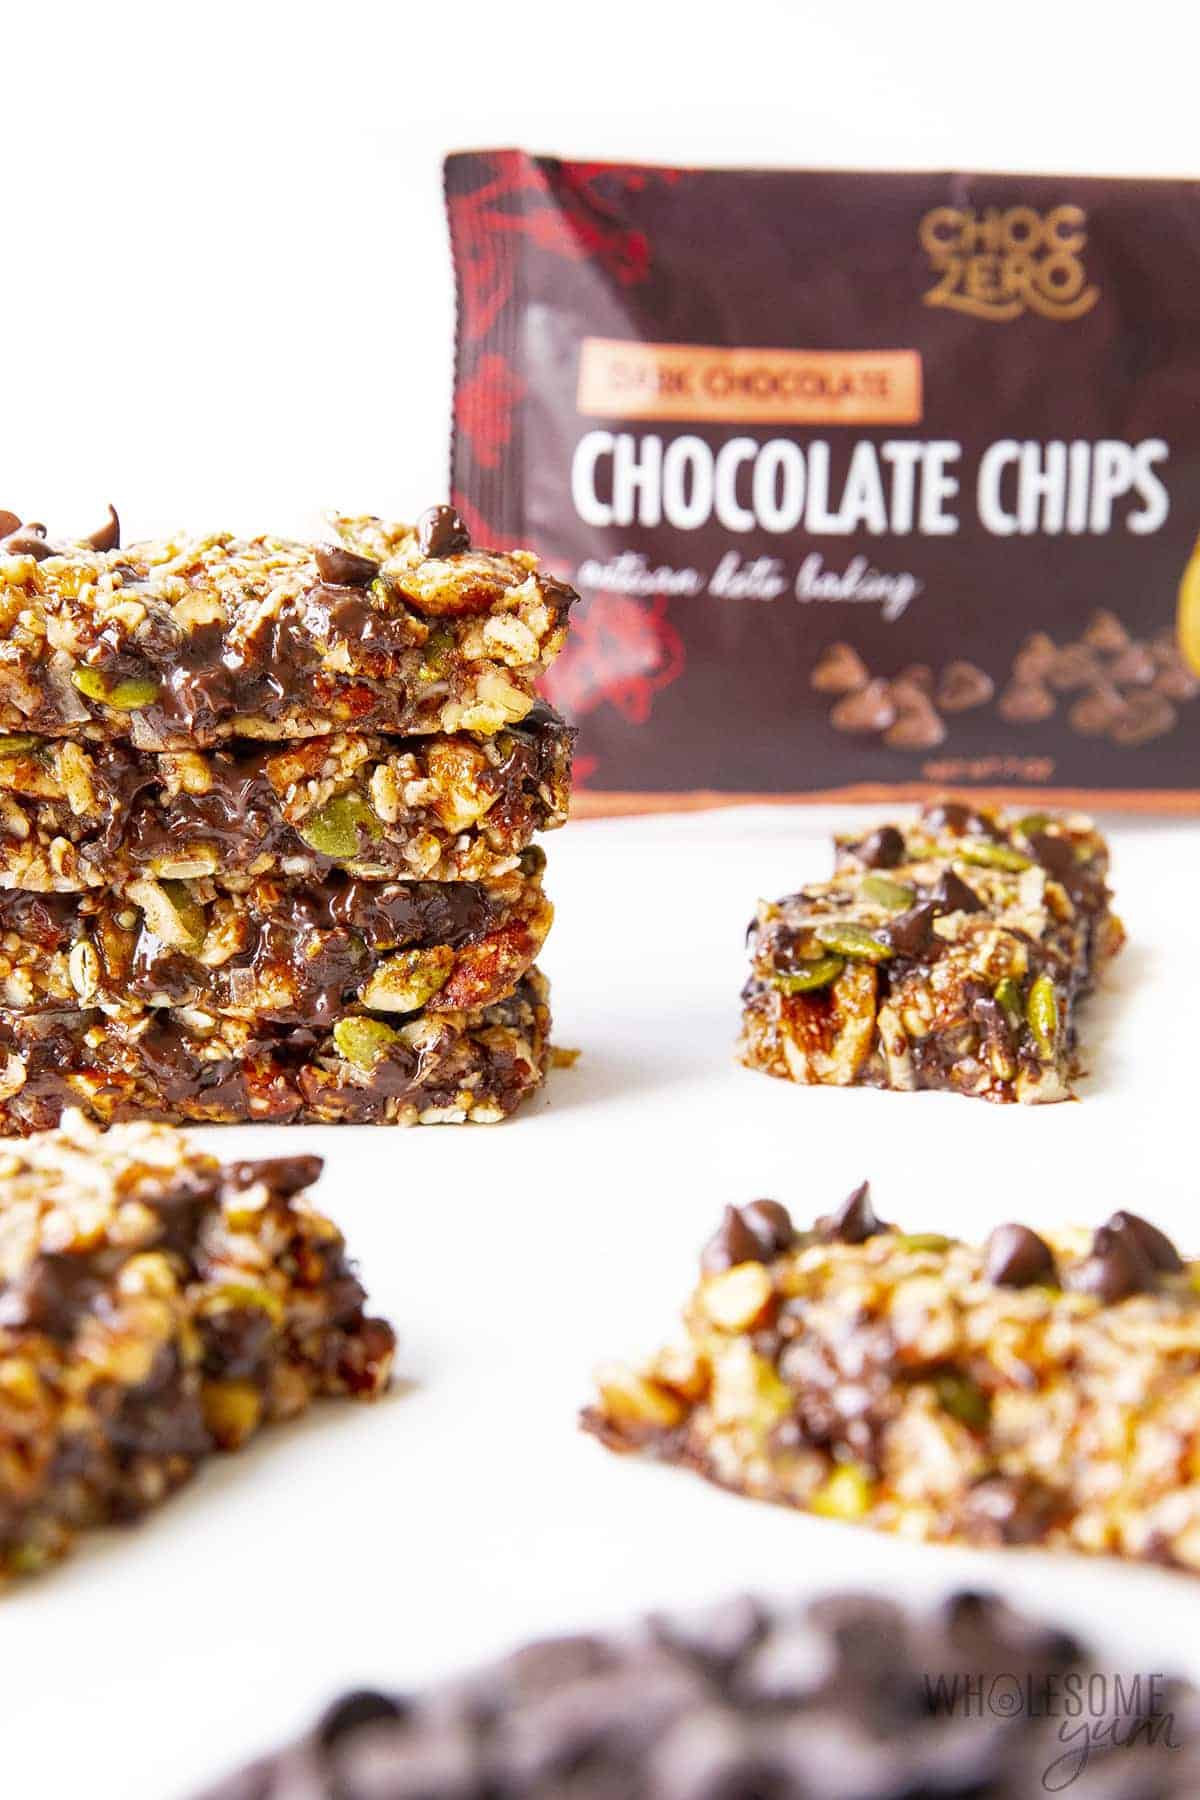 Stacked low carb granola bars with a bag of ChocZero chocolate chips in the background